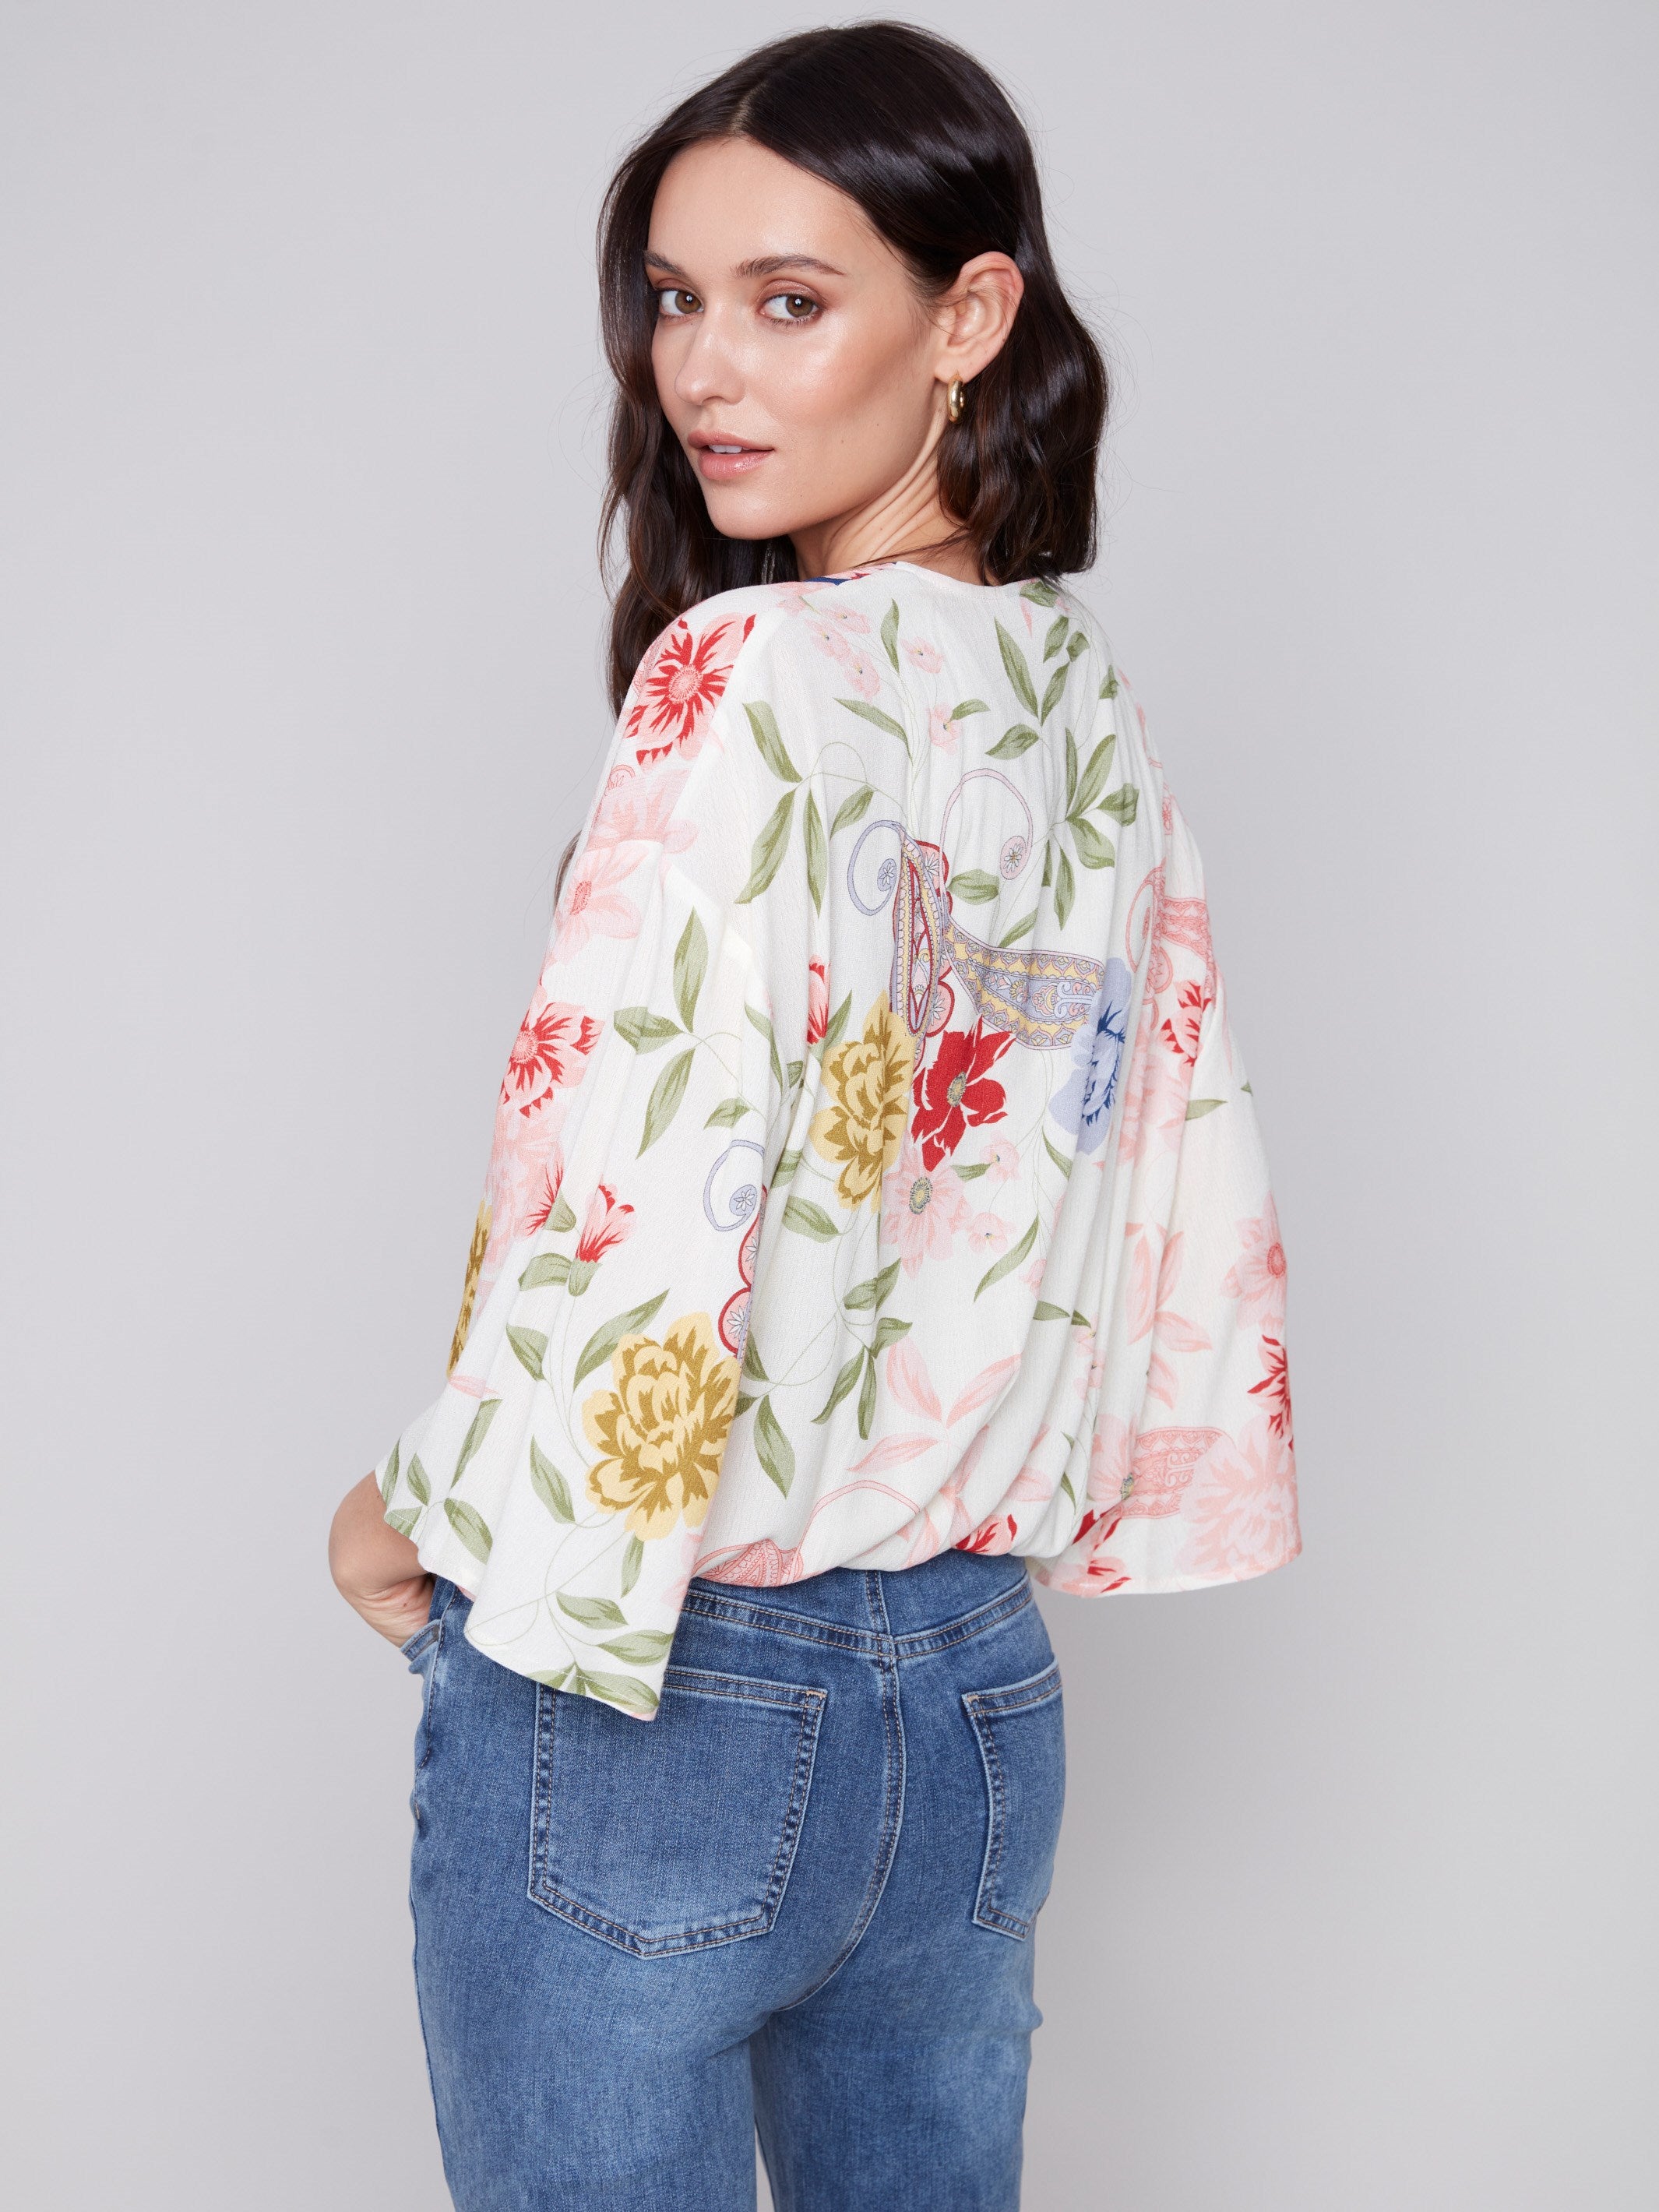 Printed Overlap Blouse - Paisley - Charlie B Collection Canada - Image 2